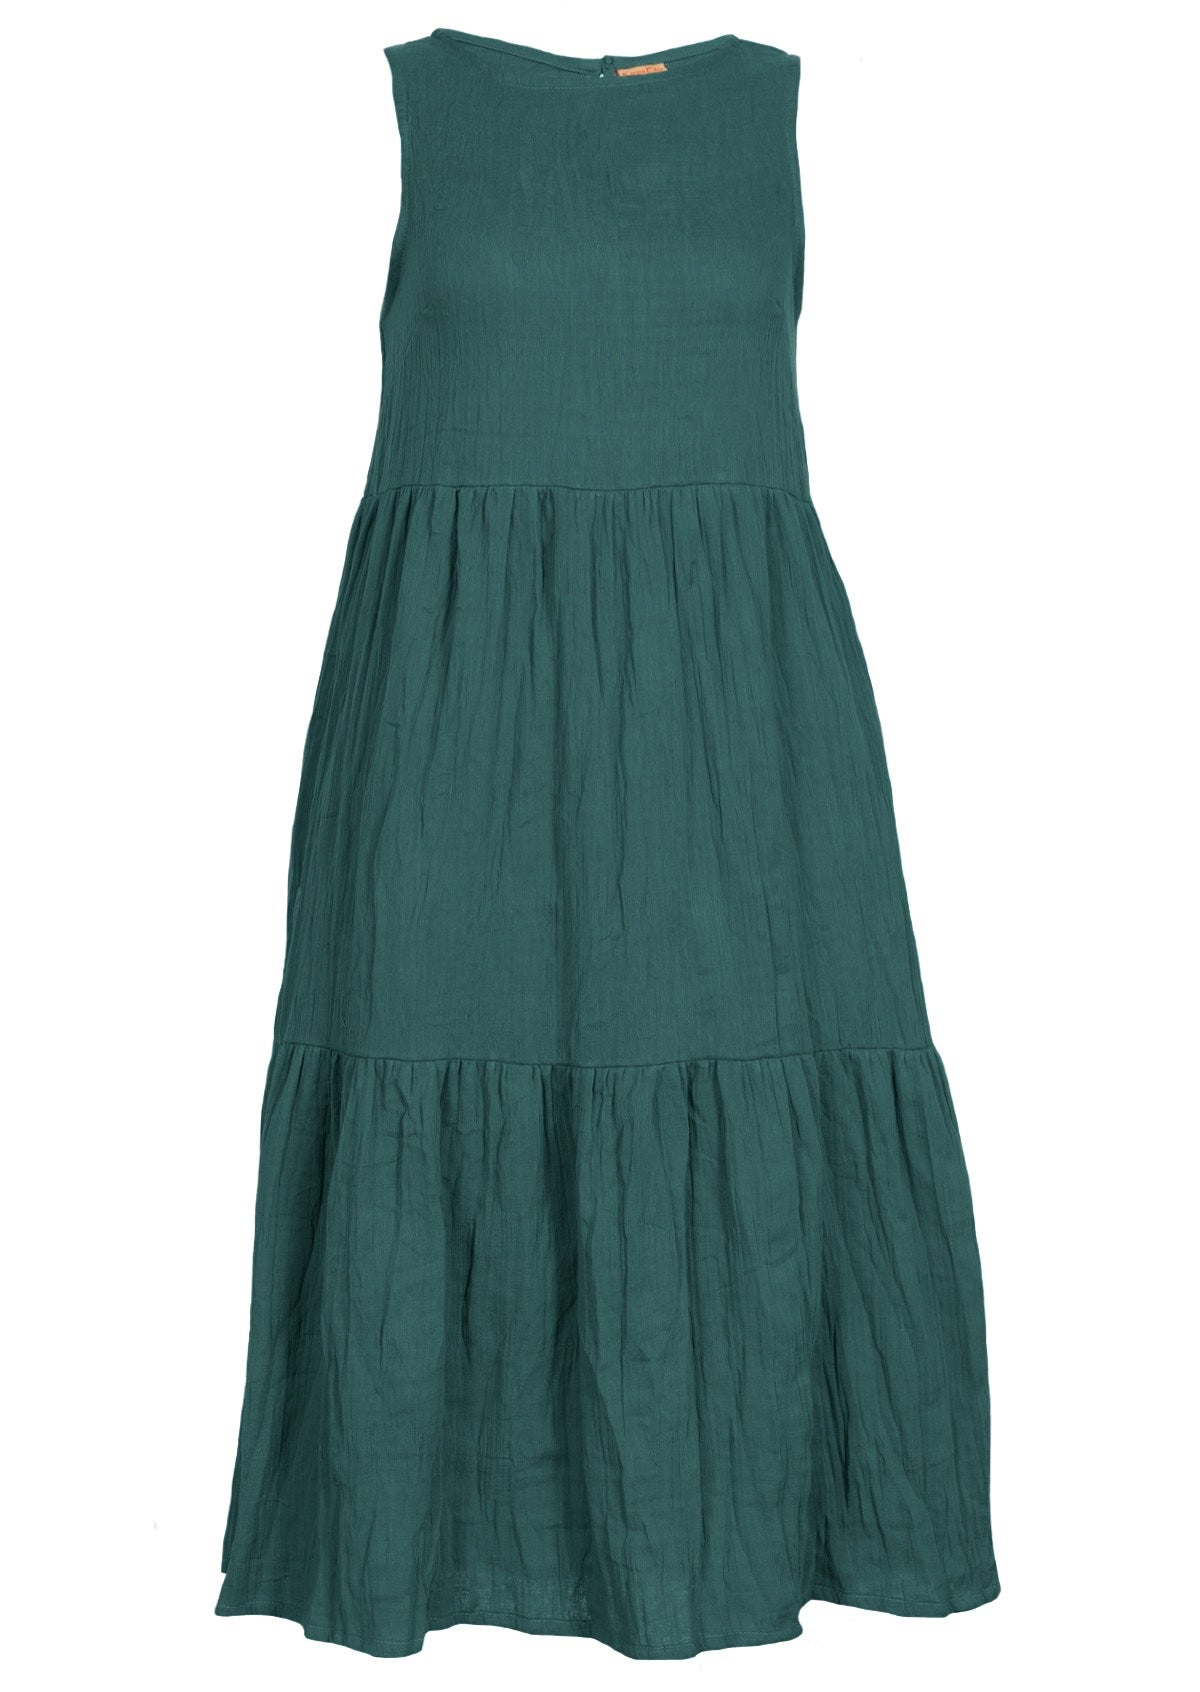 Double cotton sleeveless dress with high neckline and hidden side pockets